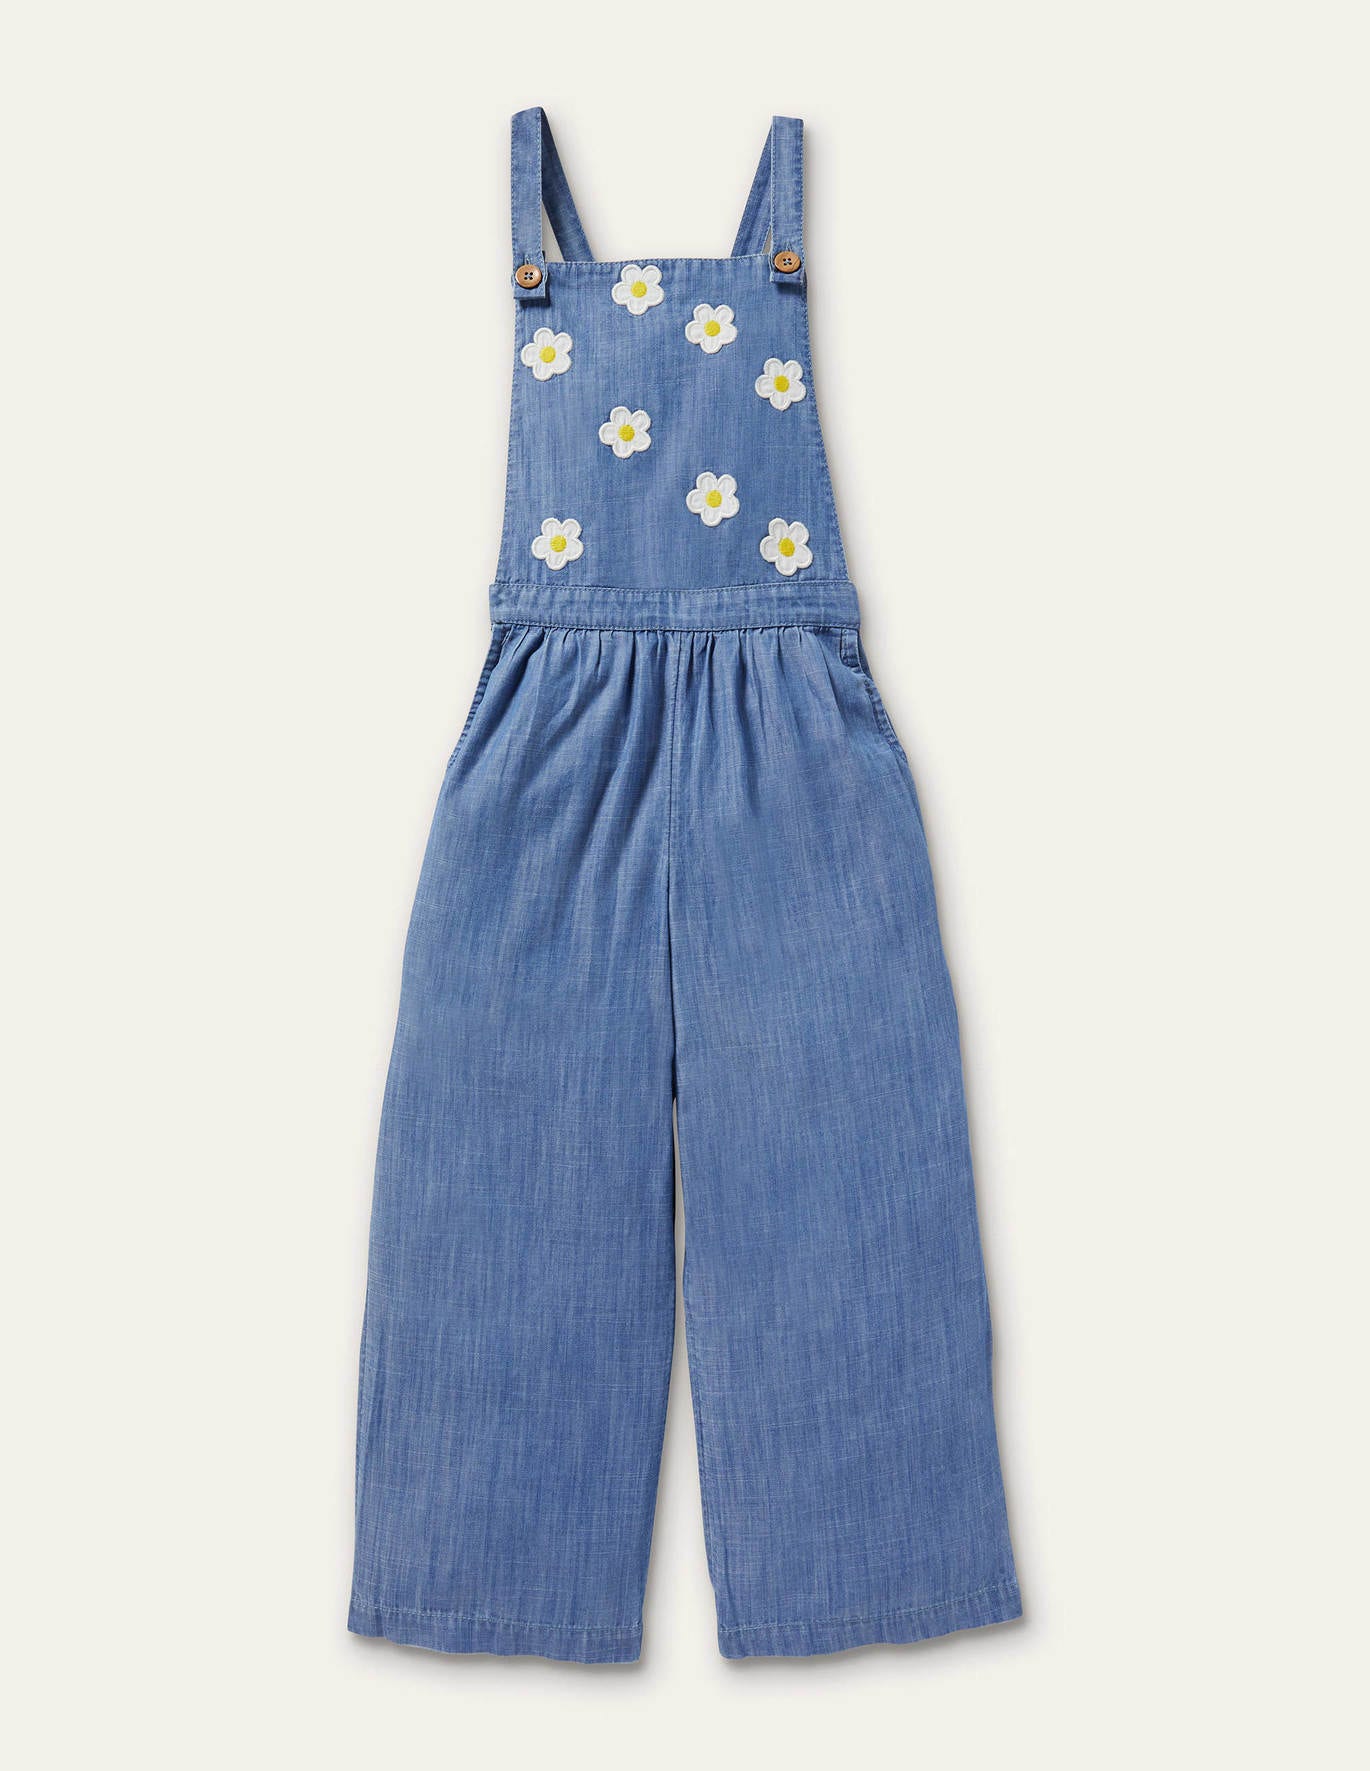 Boden Floral Overalls - Daisy Chambray